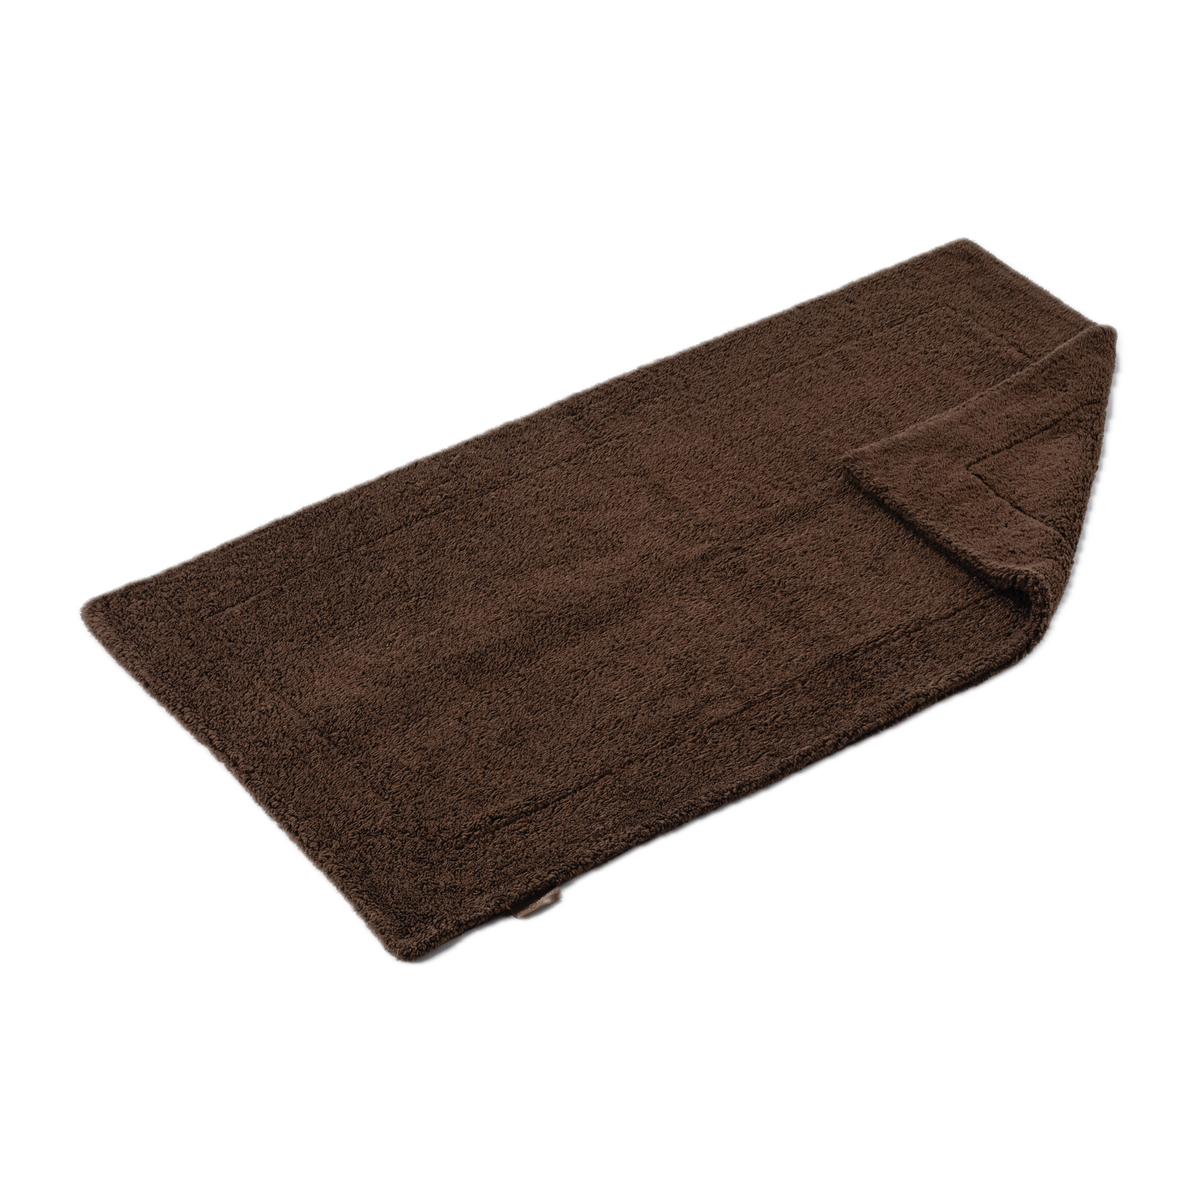 Slanted Image of Abyss Double Bath Tub Mat in Mustang (795) Color with Fold